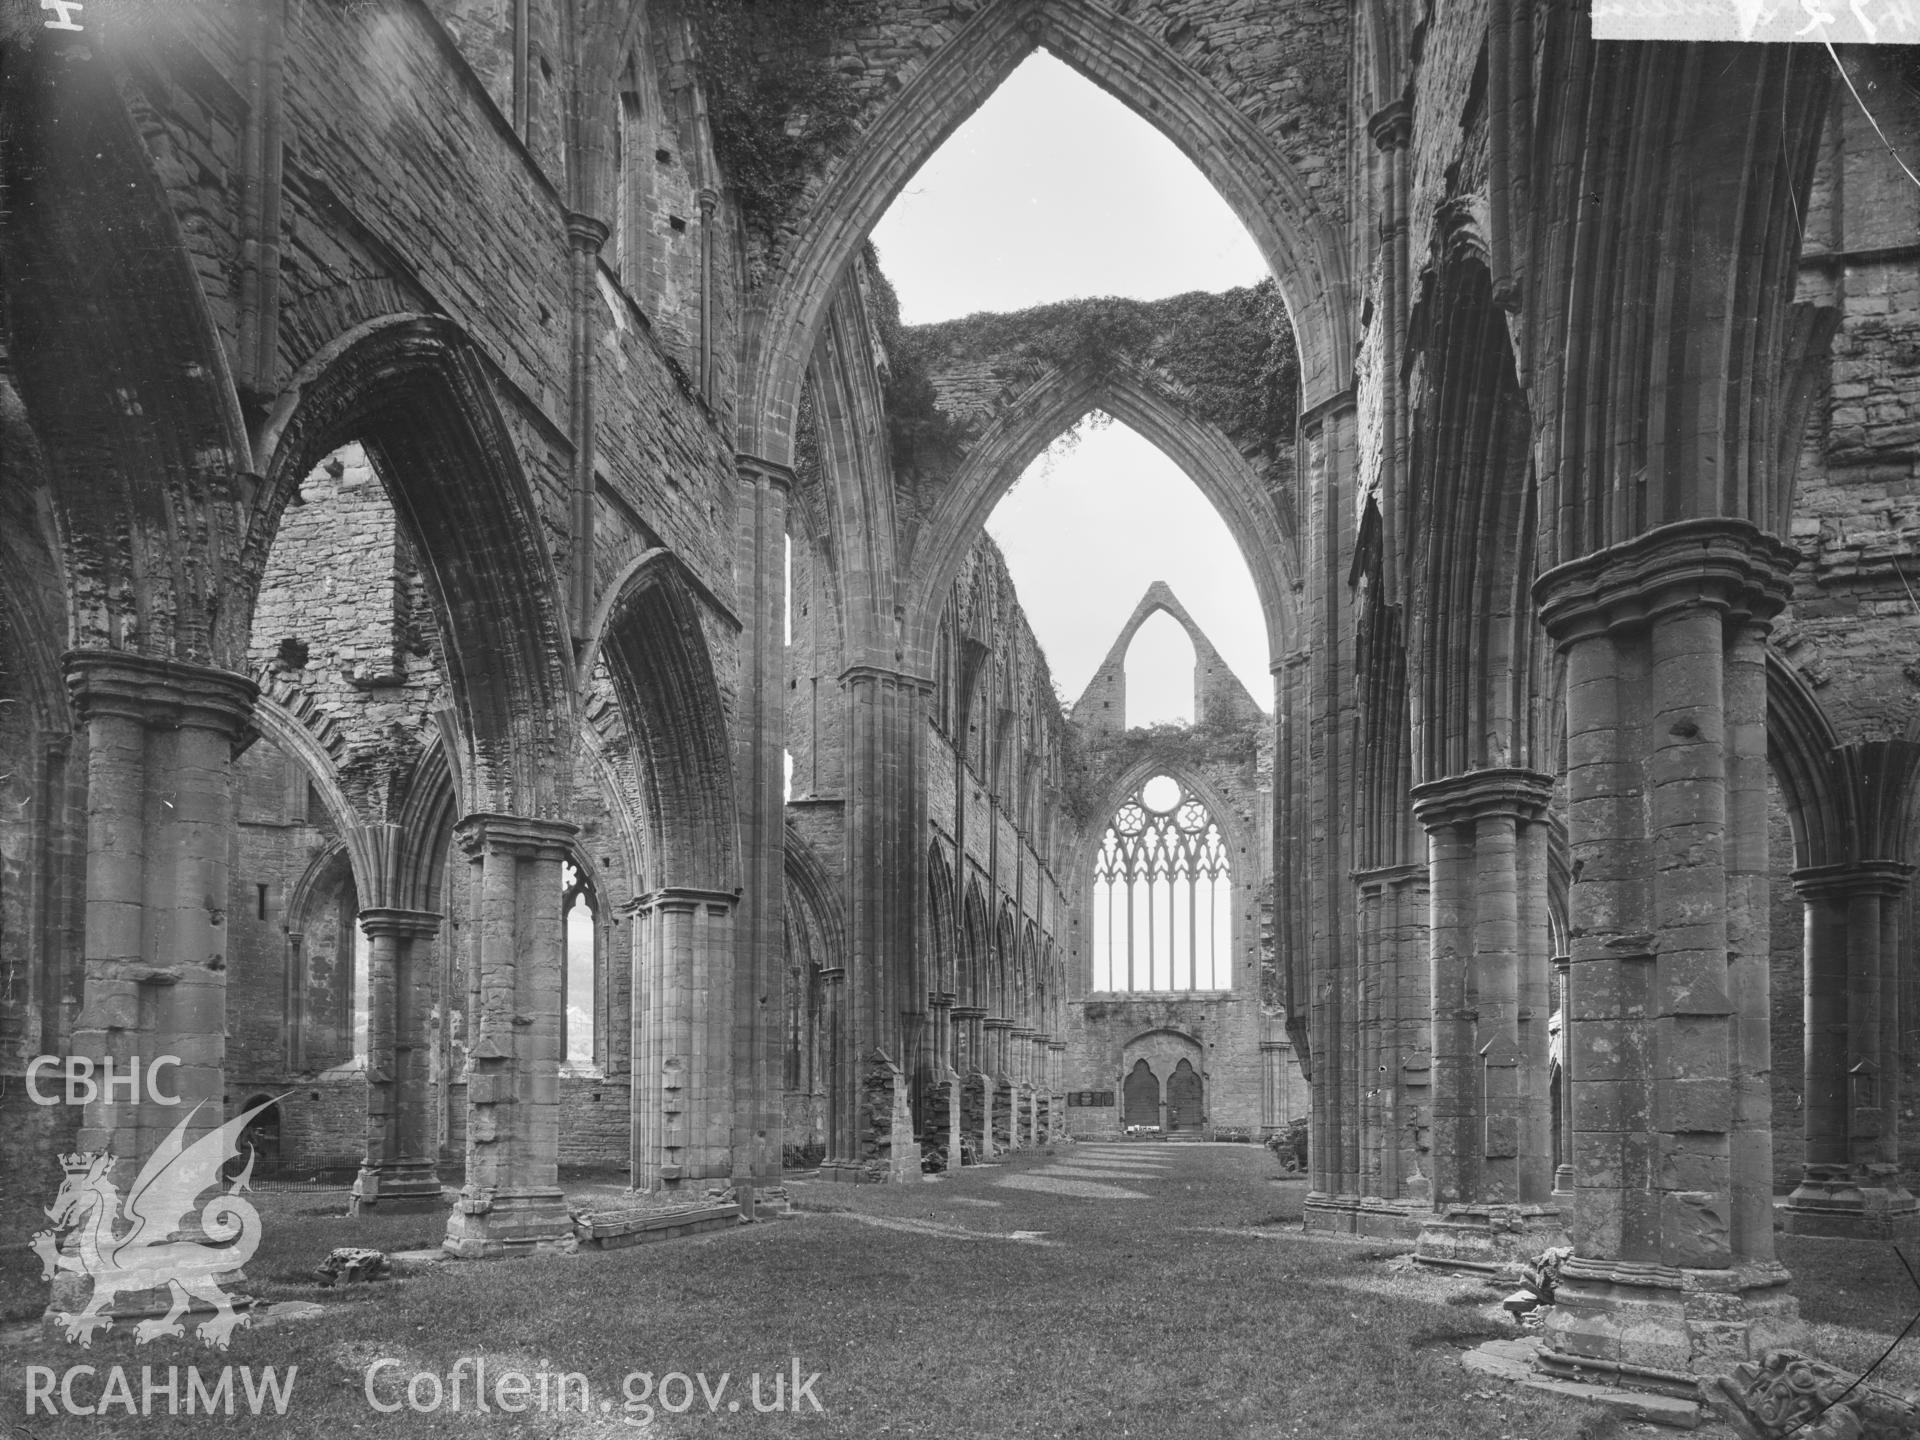 Digital copy of a glass negative showing an interior view of Tintern Abbey.